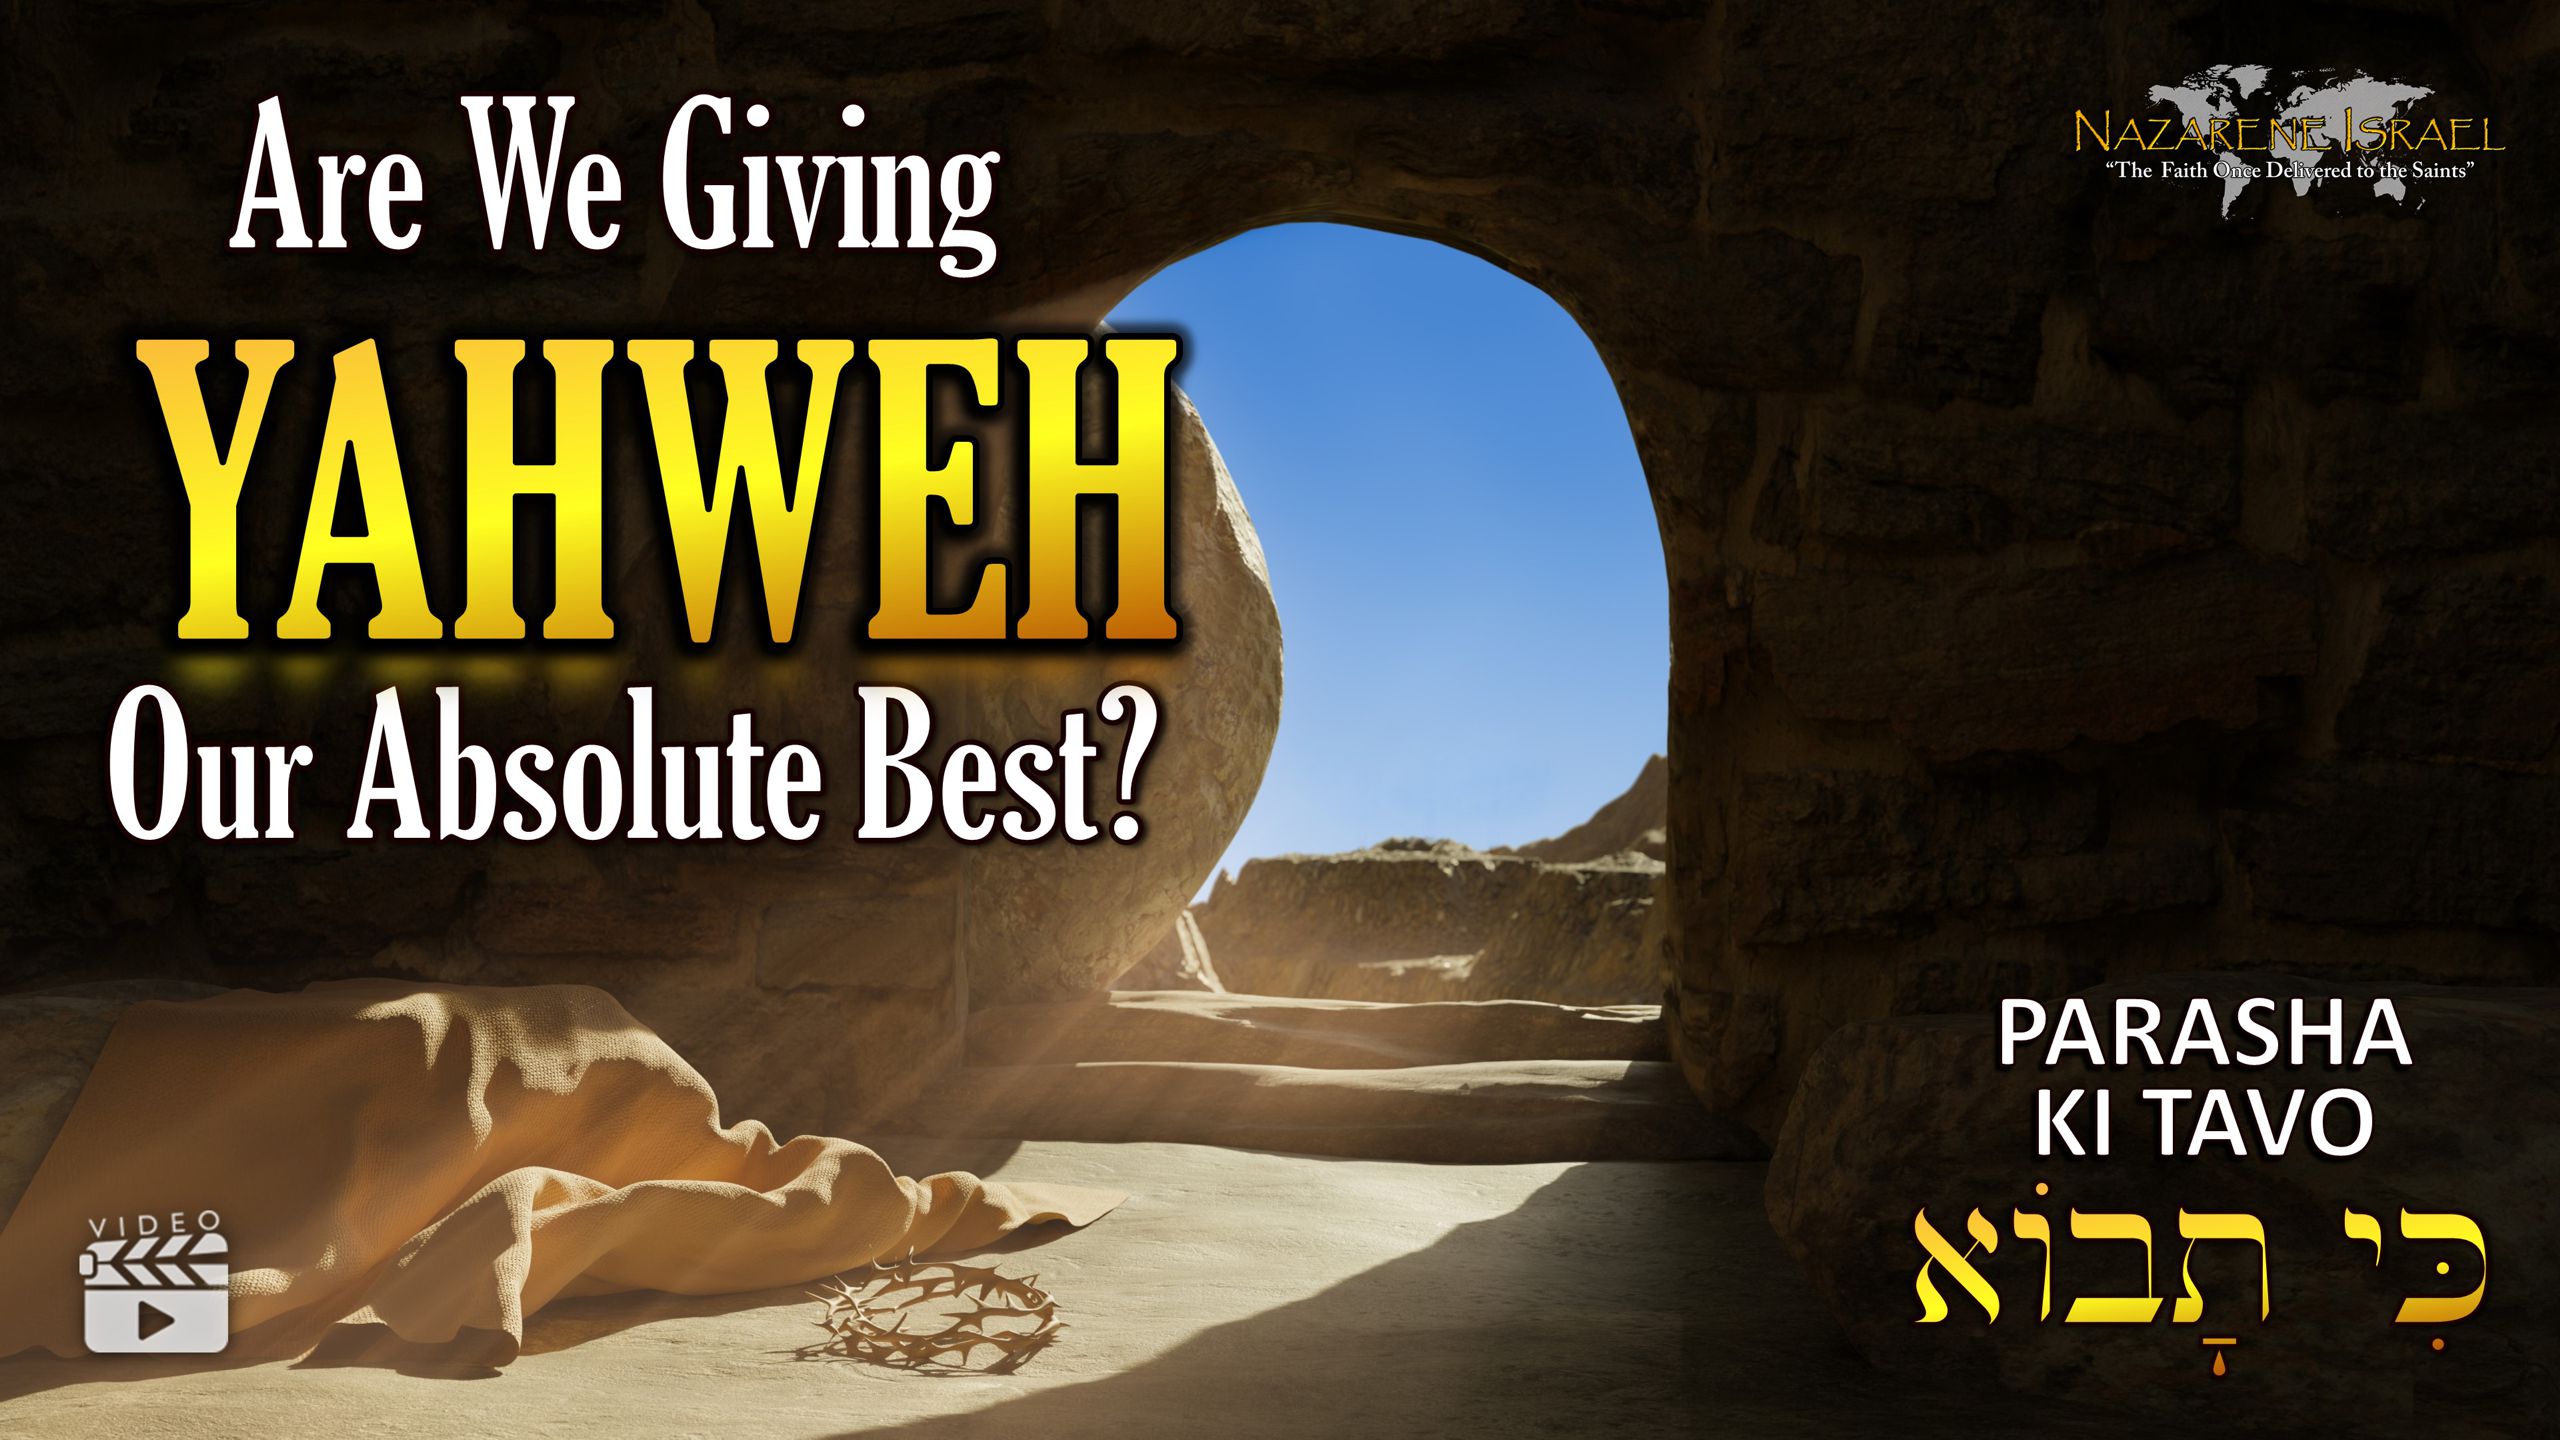 Parasha Ki Tavo – Are we giving Yahweh our absolute best?